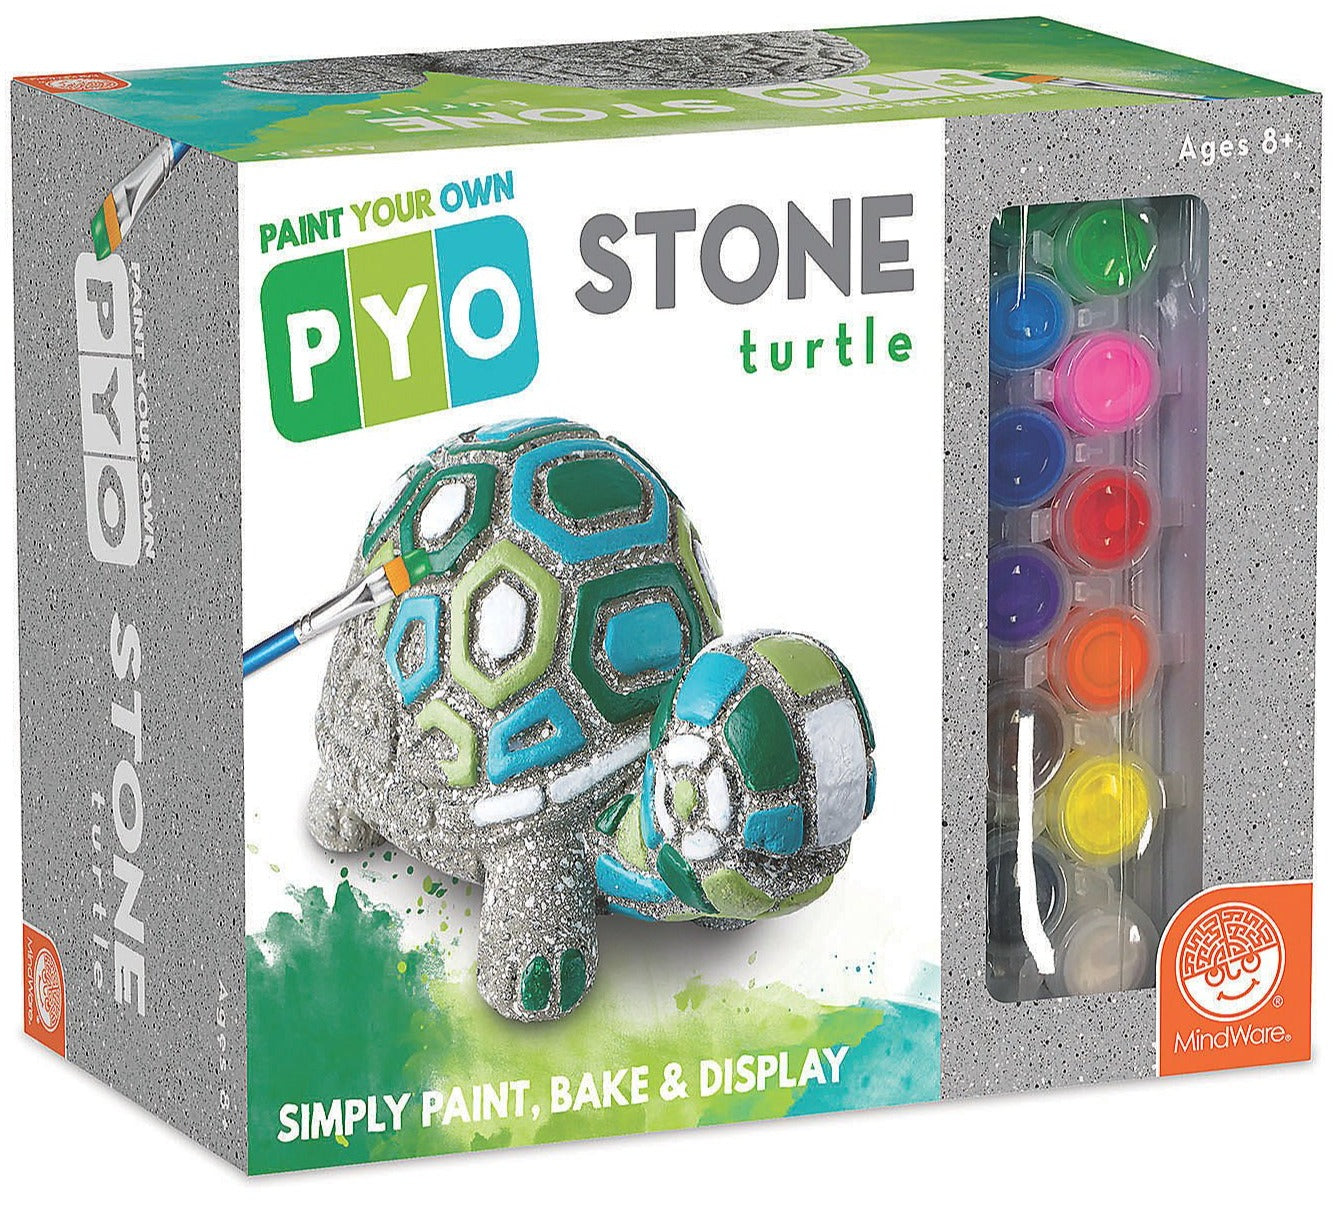 Paint Your Own Mosaic Stone Turtle